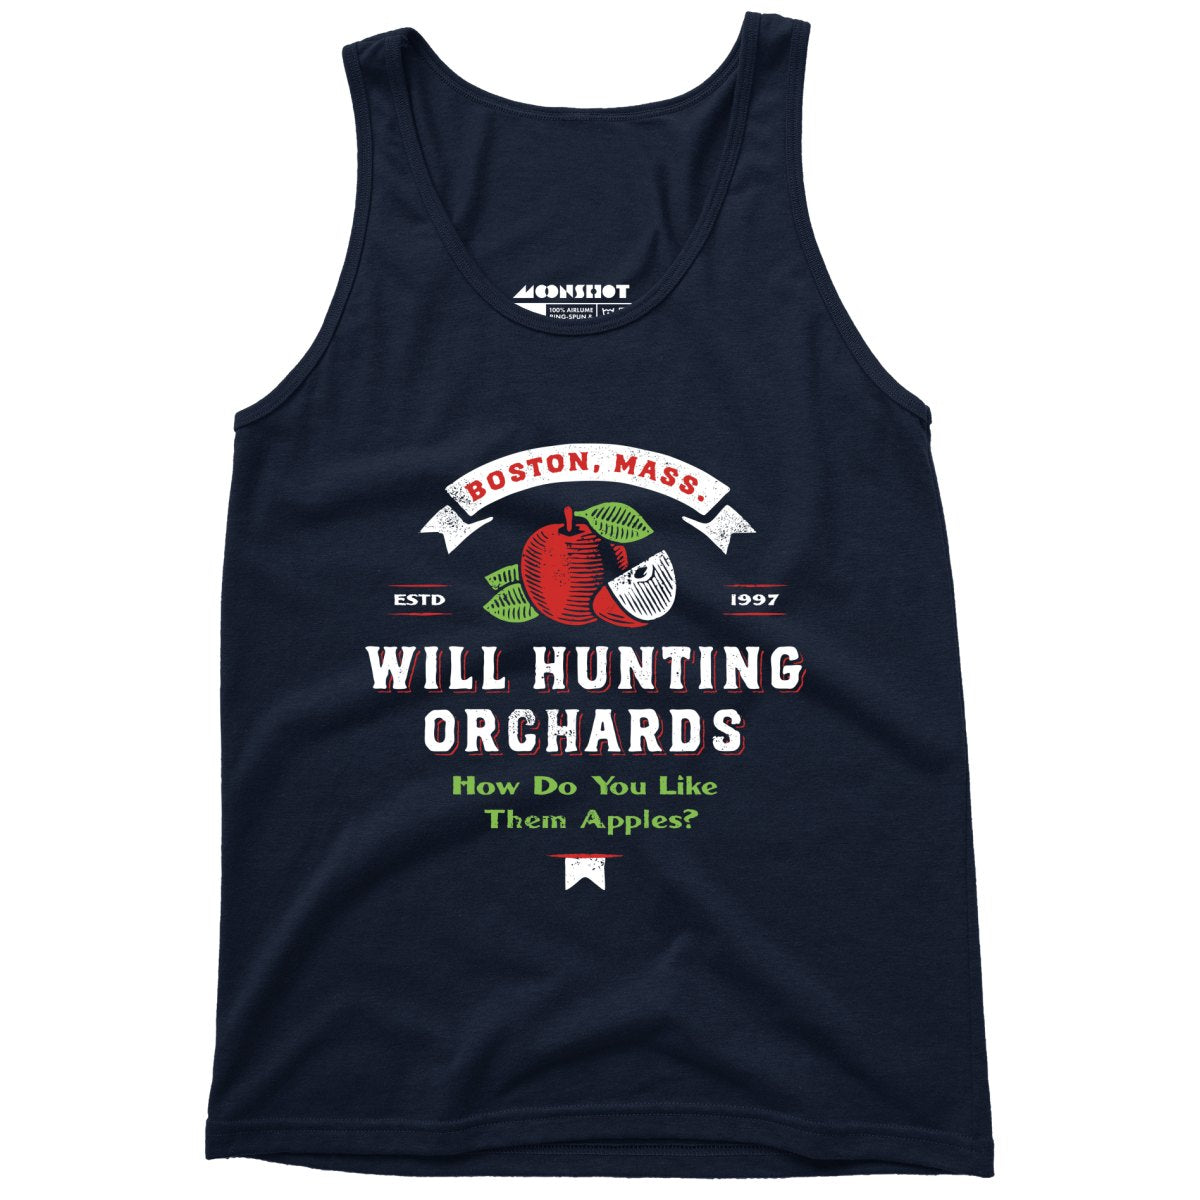 Will Hunting Orchards - Unisex Tank Top